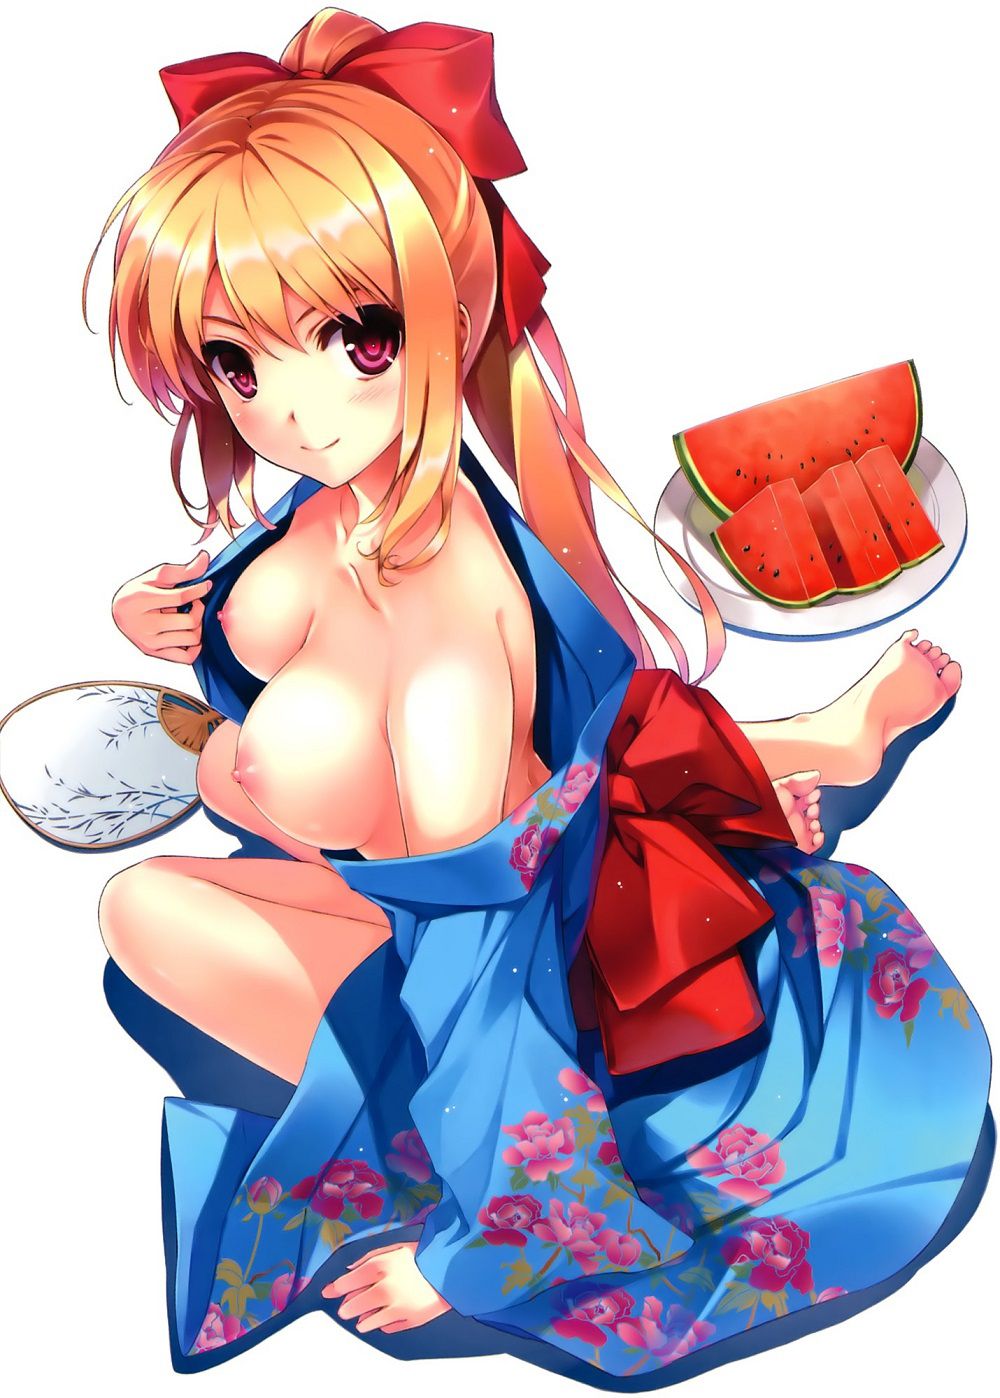 Find erotic images of 2-d girl dressed in yukata and kimono Part2 (29 photos) 3